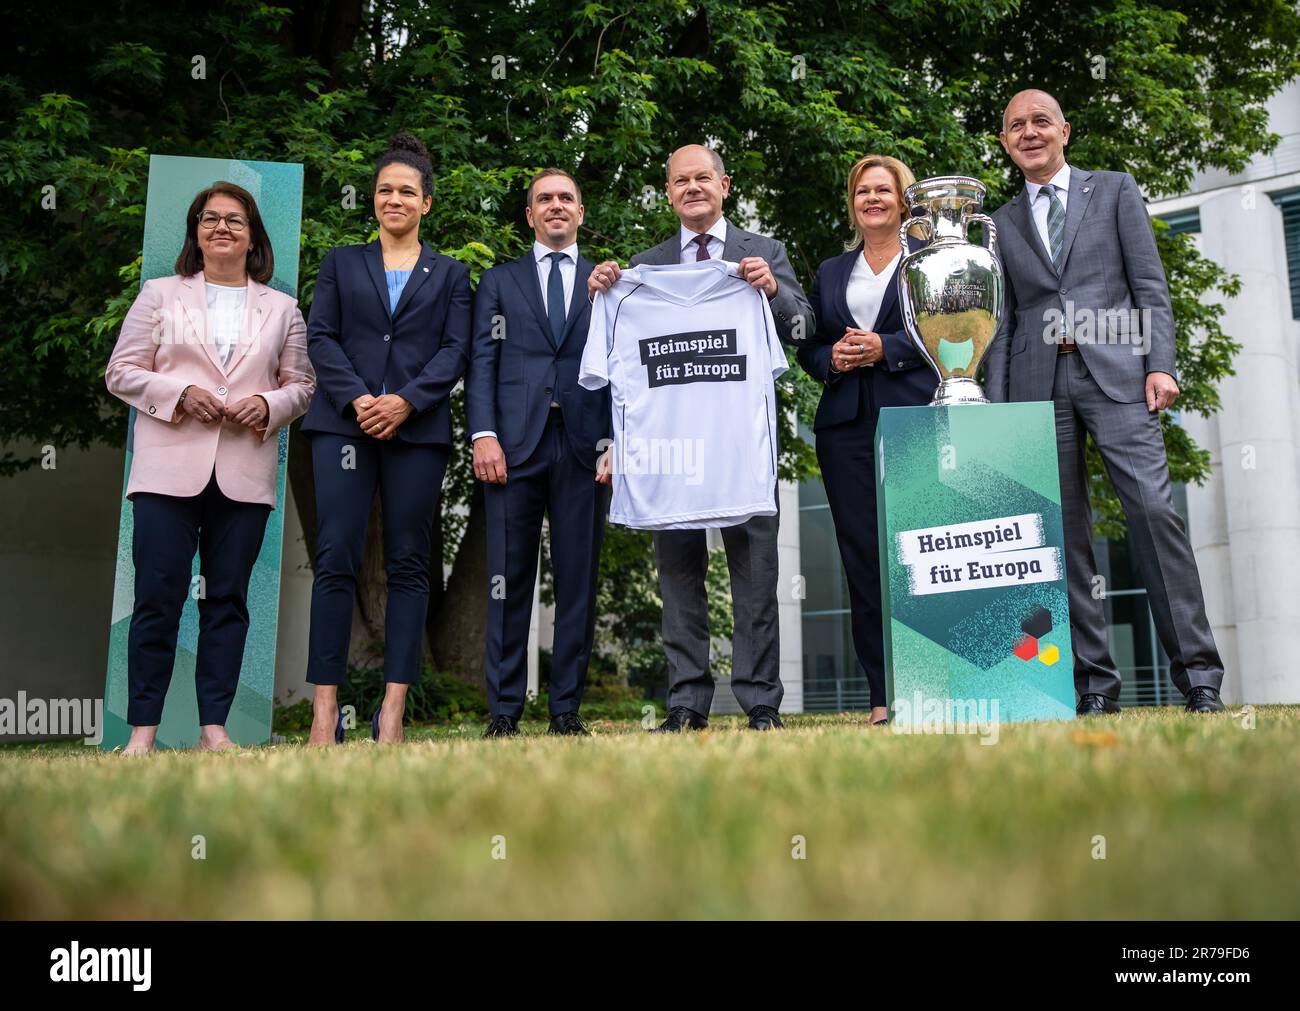 Berlin, Germany. 14th June, 2023. Soccer, European Championship: Heike Ullrich (l-r), Secretary General of the German Football Association (DFB), Celia Sasic, DFB Integration Ambassador, Philipp Lahm, Tournament Director, German Chancellor Olaf Scholz (SPD), Nancy Faeser (SPD), Federal Minister of the Interior, and Bernd Neuendorf, President of the DFB, stand together in the garden of the Chancellor's Office. One year before the start of the 2024 European Championship in Germany, the DFB provides information on the status of preparations. Credit: Michael Kappeler/dpa/Alamy Live News Stock Photo